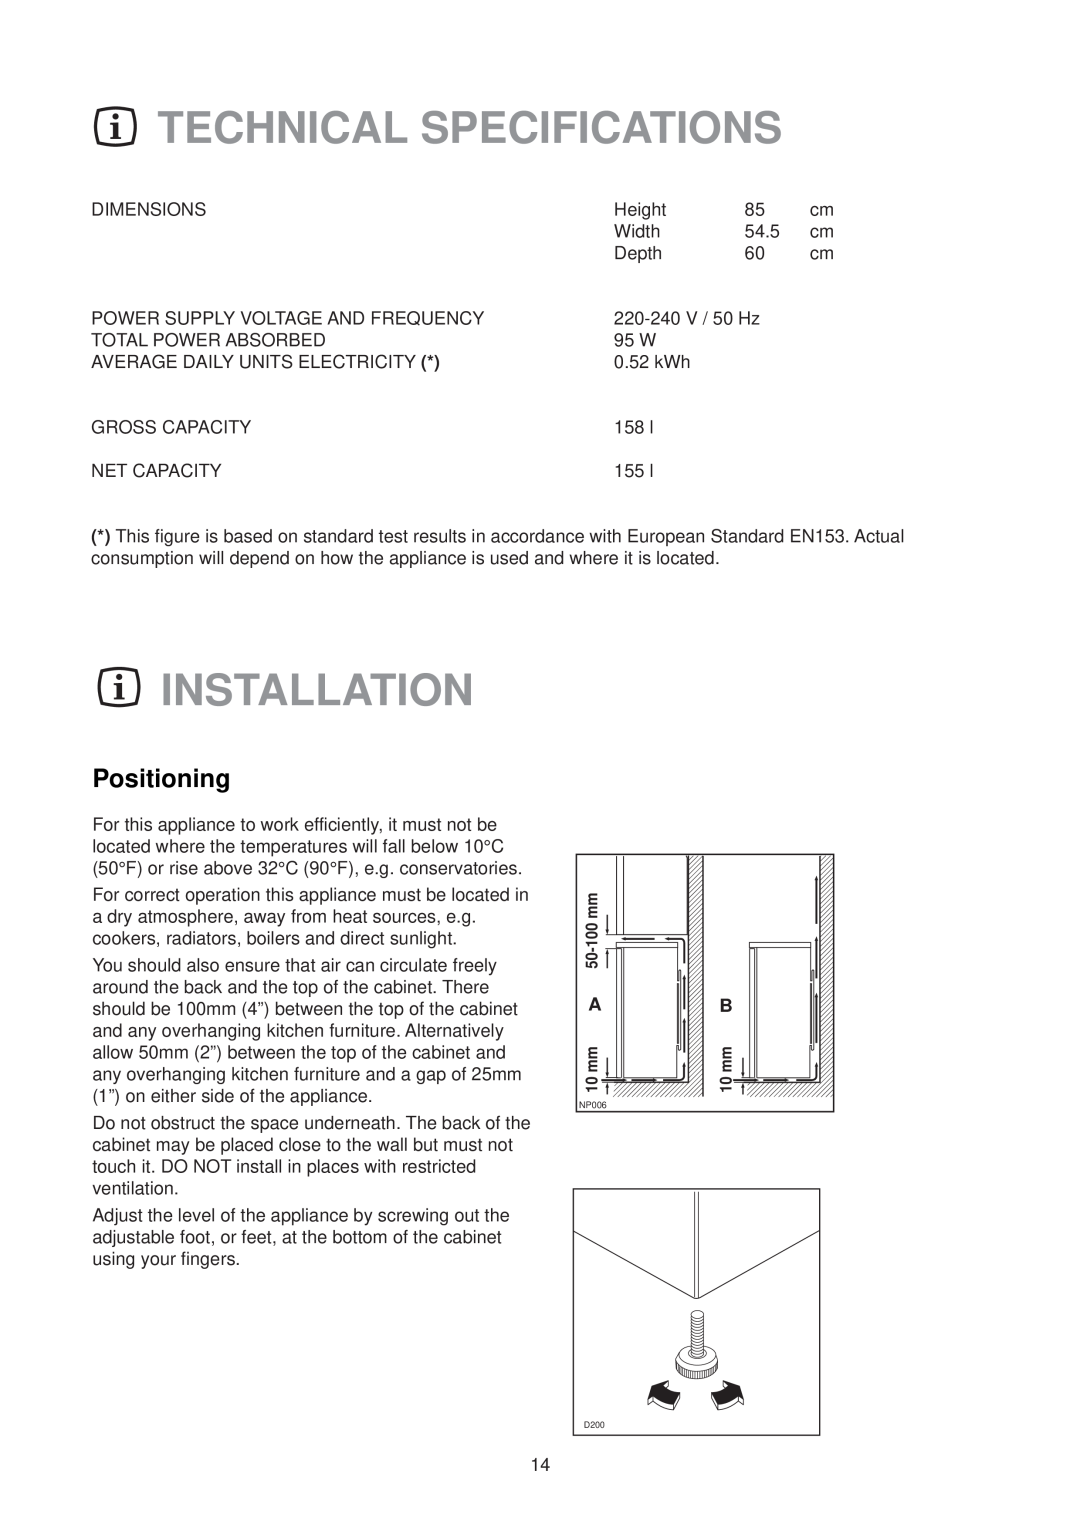 Electrolux U21312 manual Technical Specifications, Installation, Positioning 